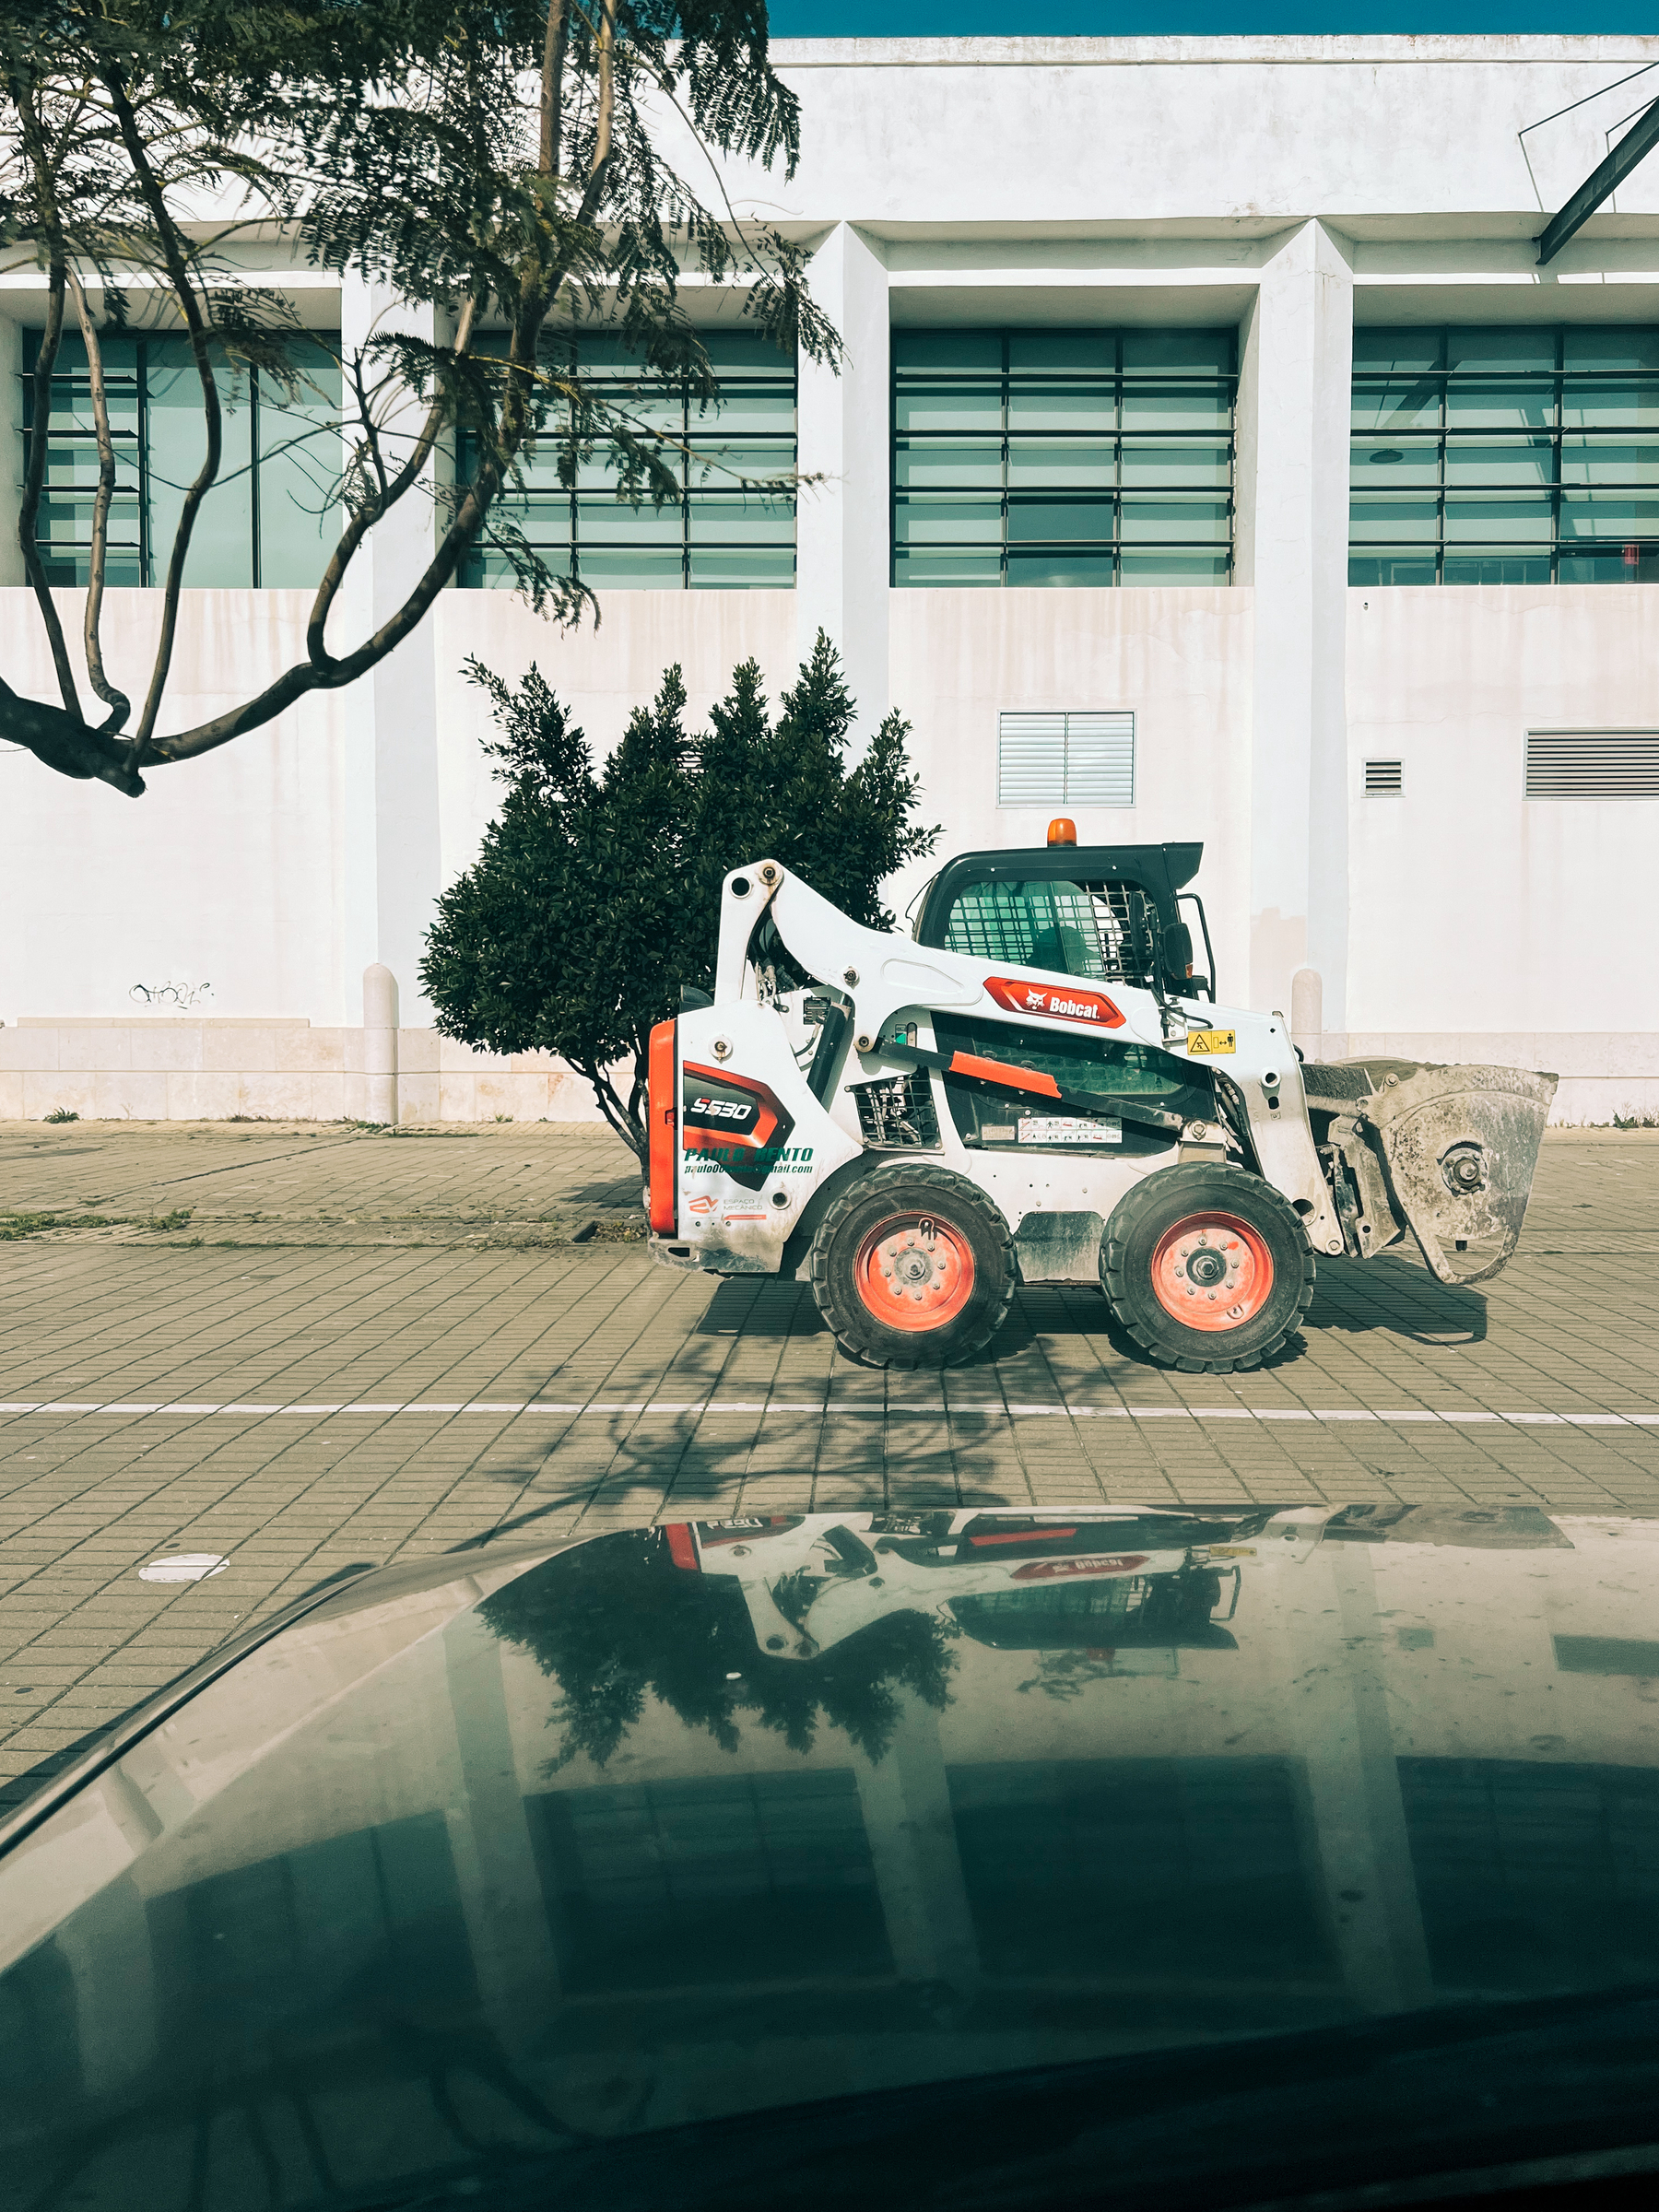 A skid-steer loader riding on a paved area with a modern building and trees in the background, the loader is reflected on the glossy hood of a car in the foreground.